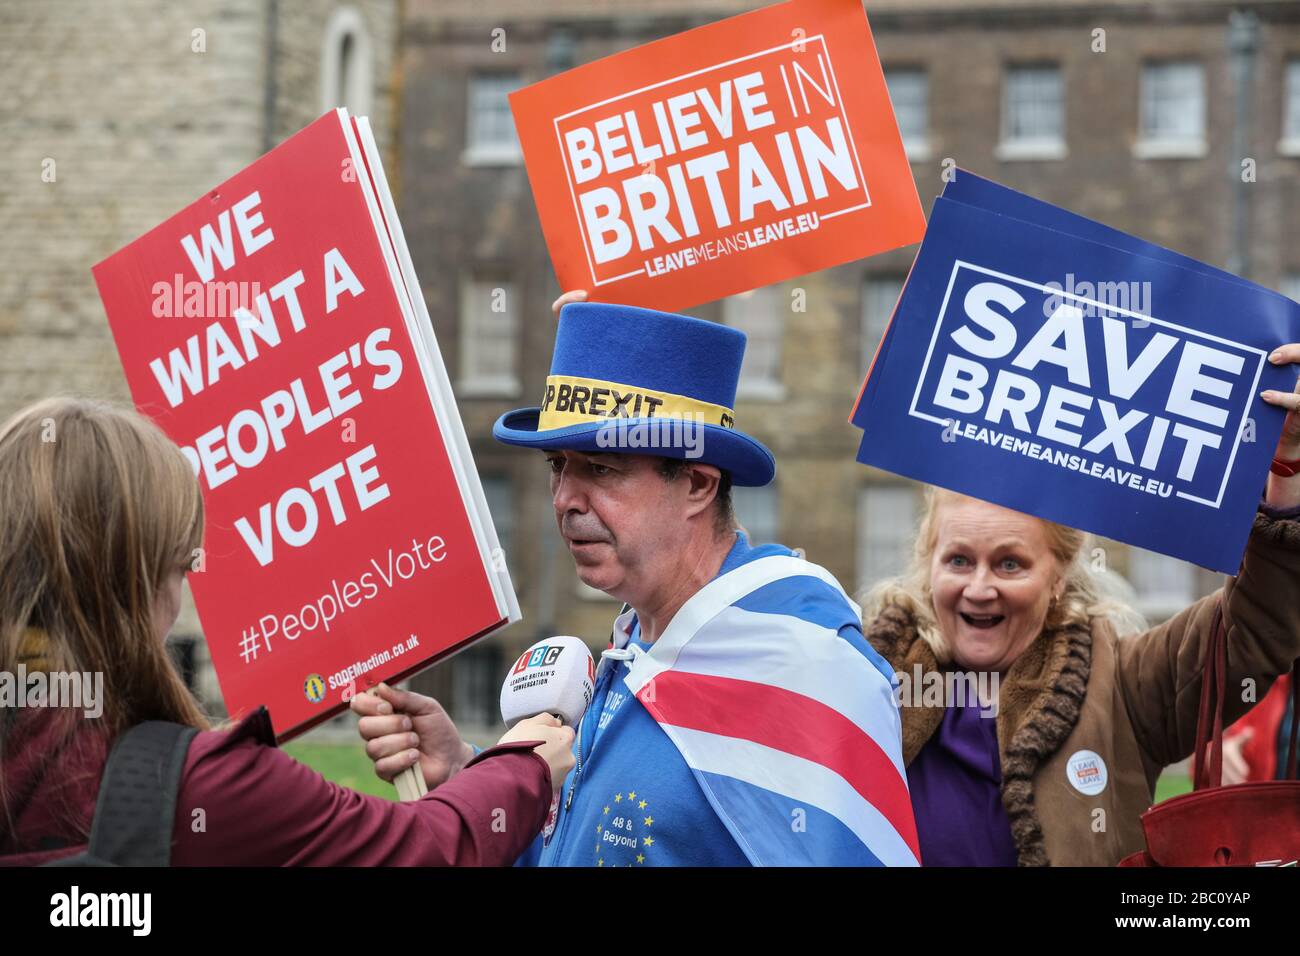 Anti-Brexit protester Steven Bray interviewed in Westminster, Pro-Brexit demonstrators in background, London, UK Stock Photo